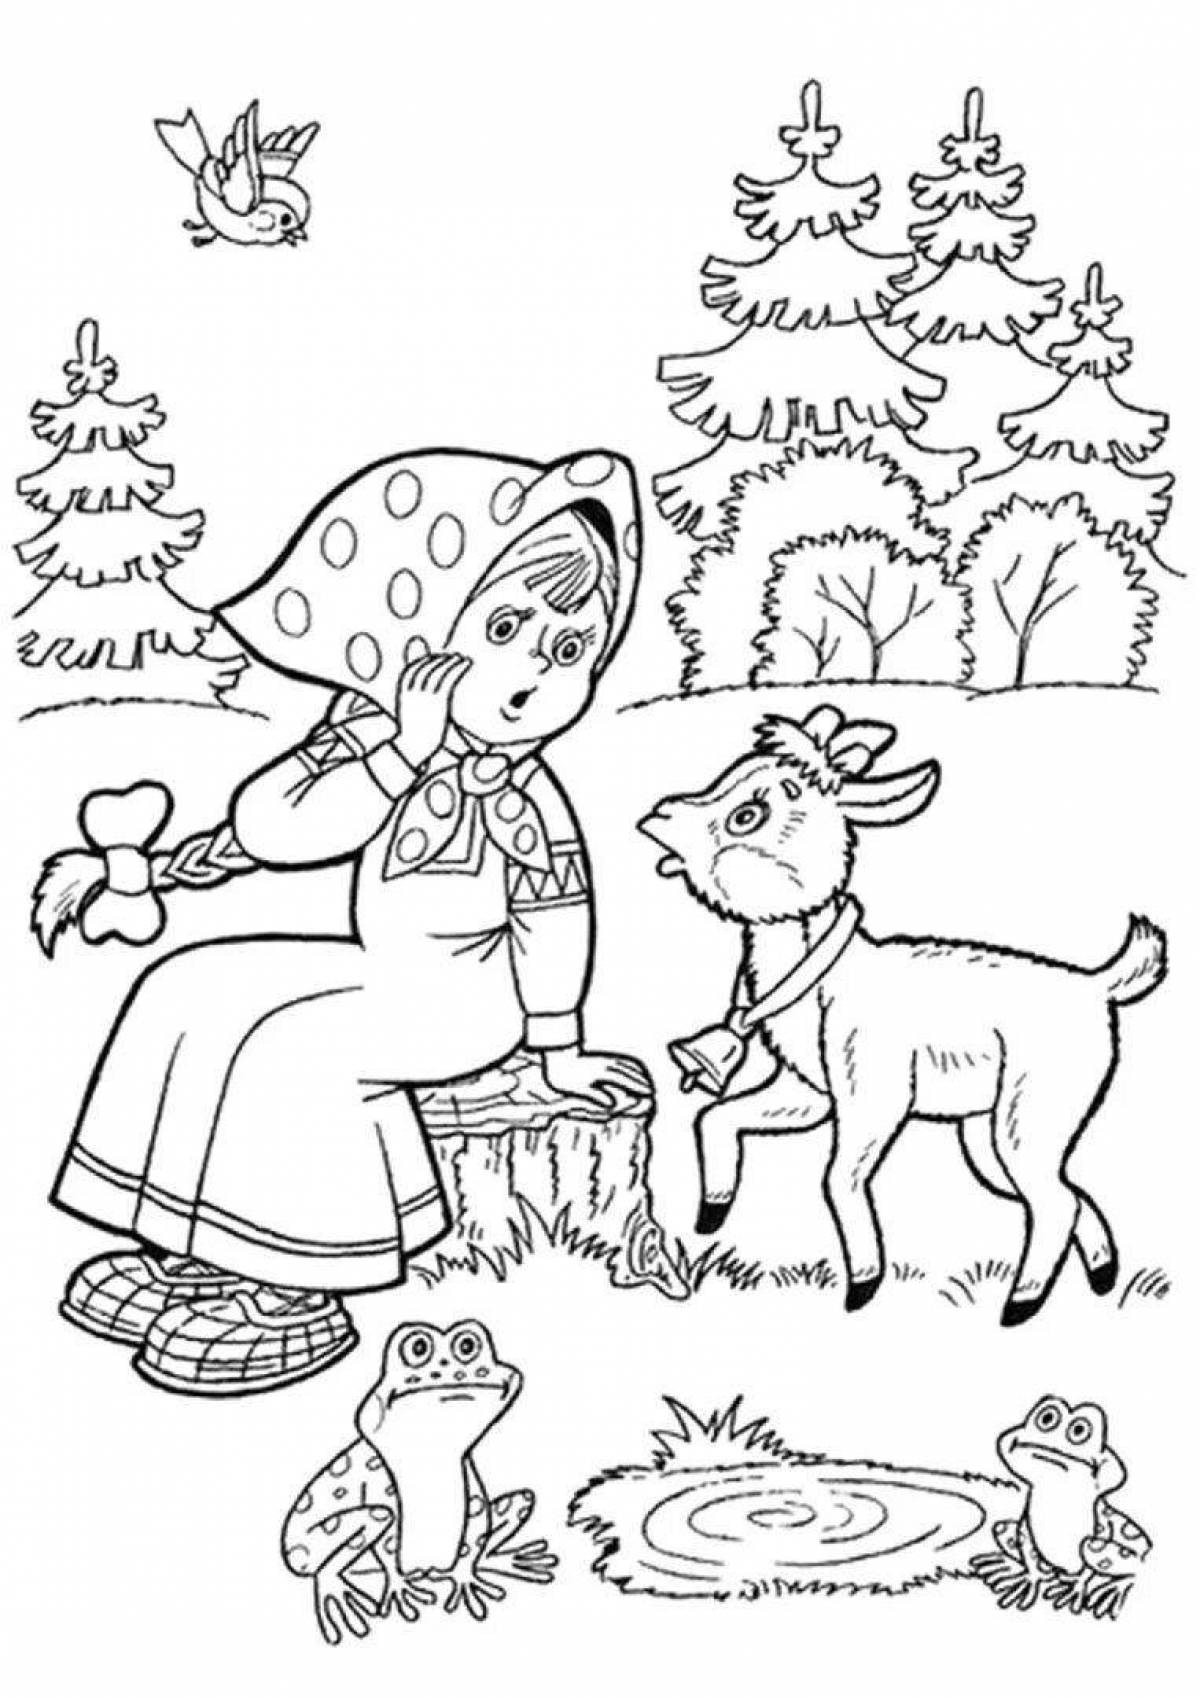 Coloring page charming Russian folk tales